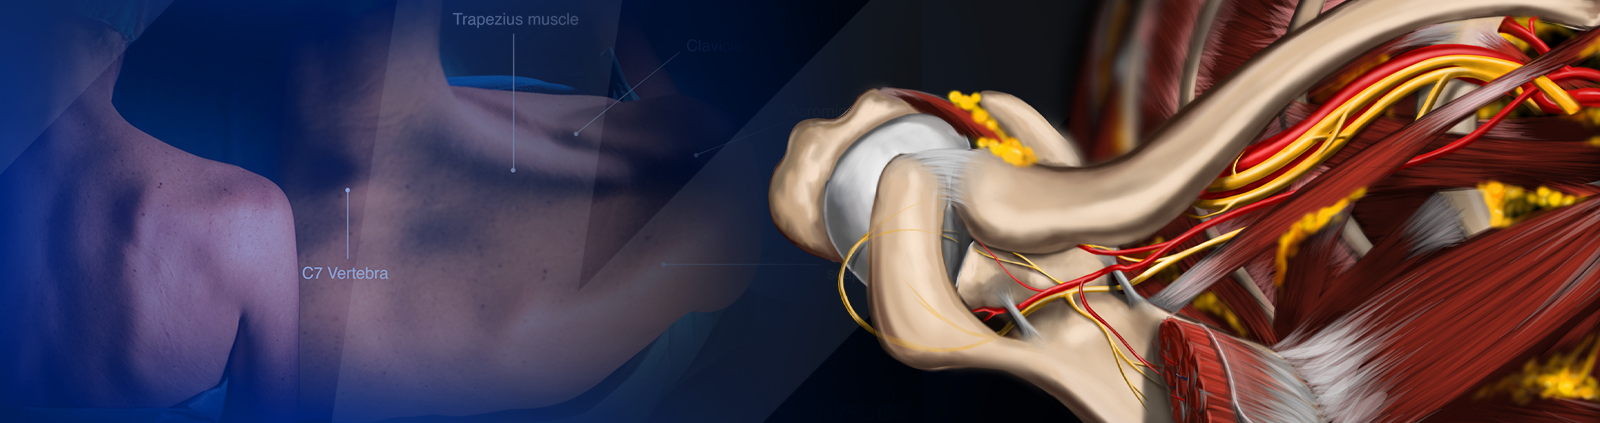 CME COURSE – Upper Extremity Blocks Part II